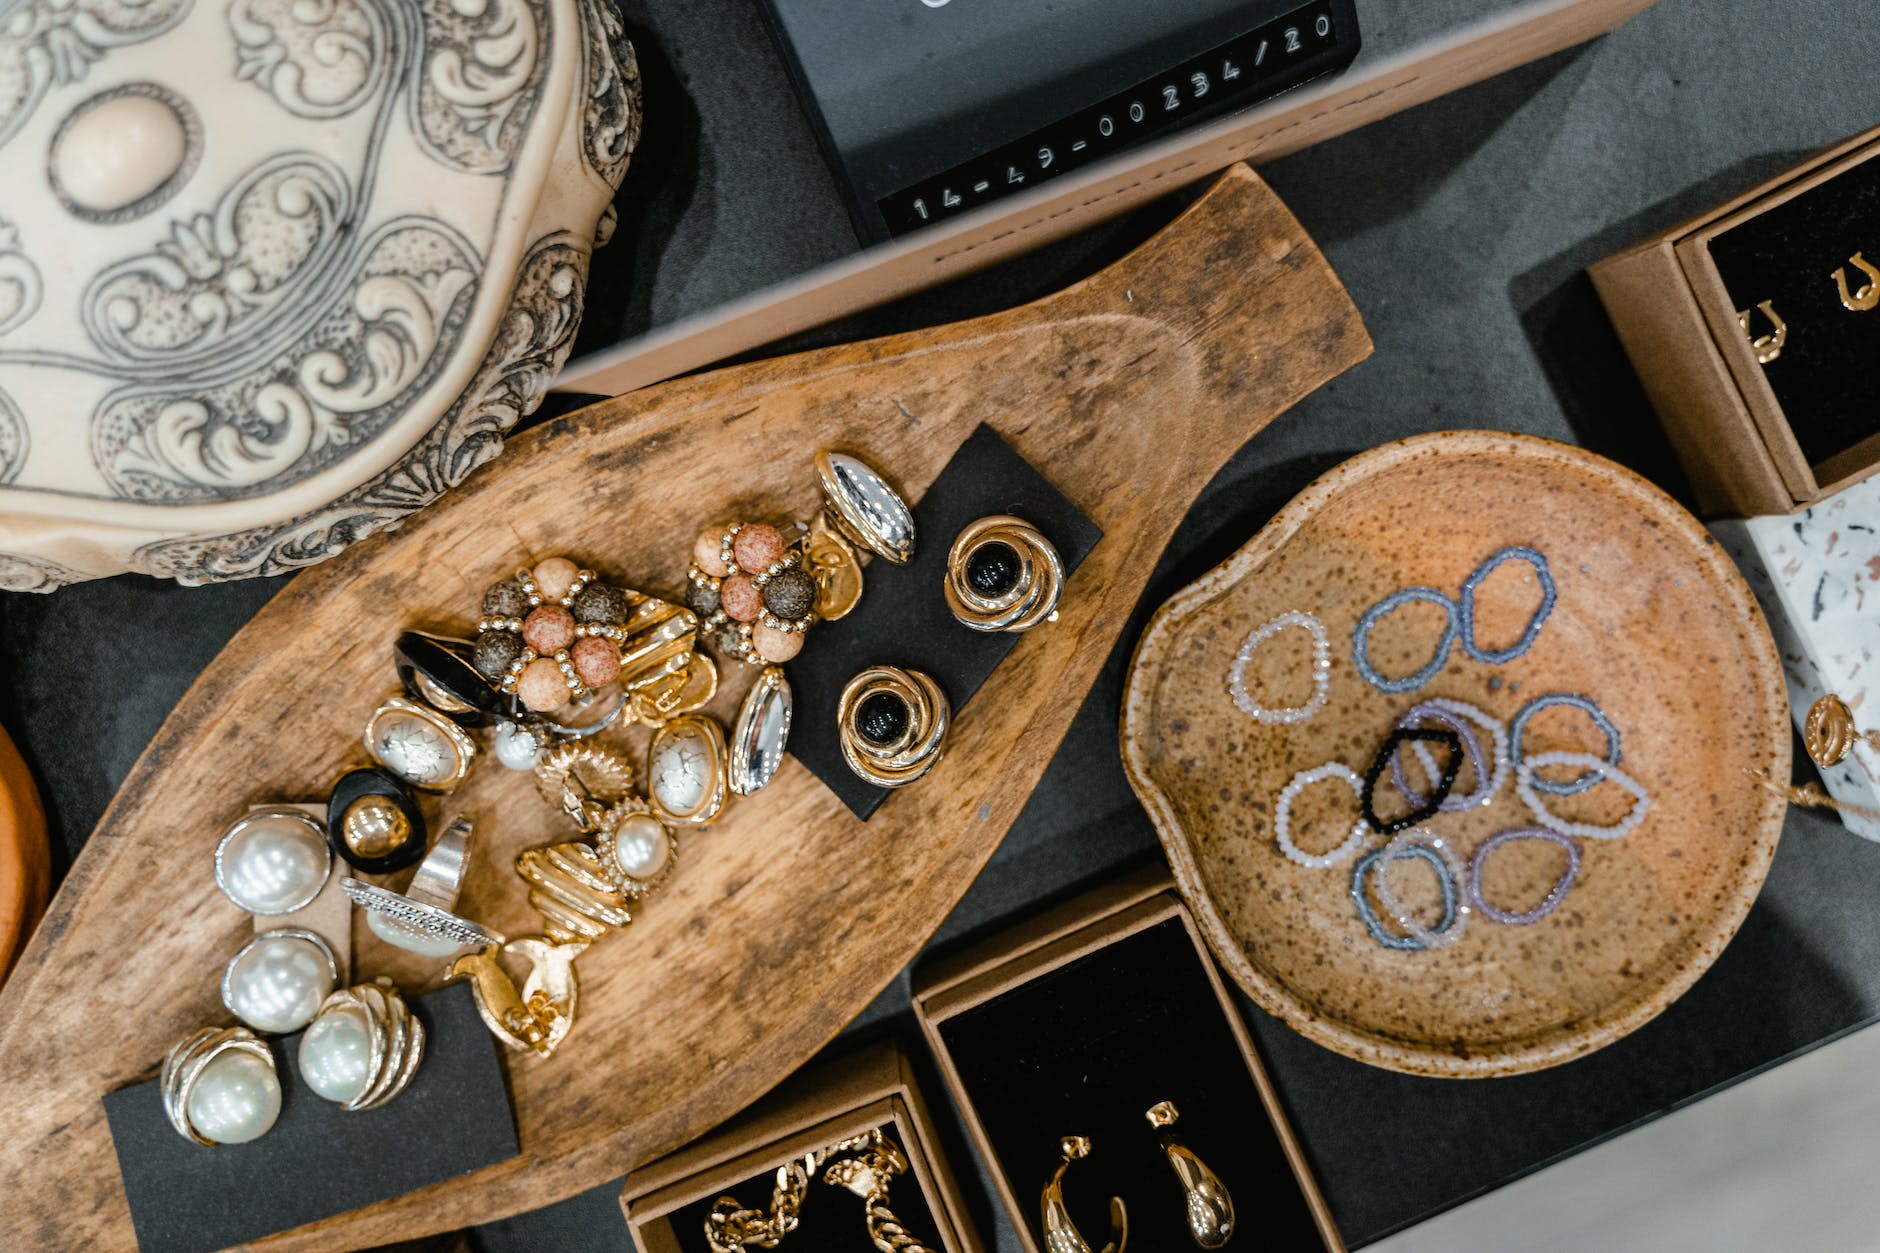 gemstones and jewelries on a wooden tray